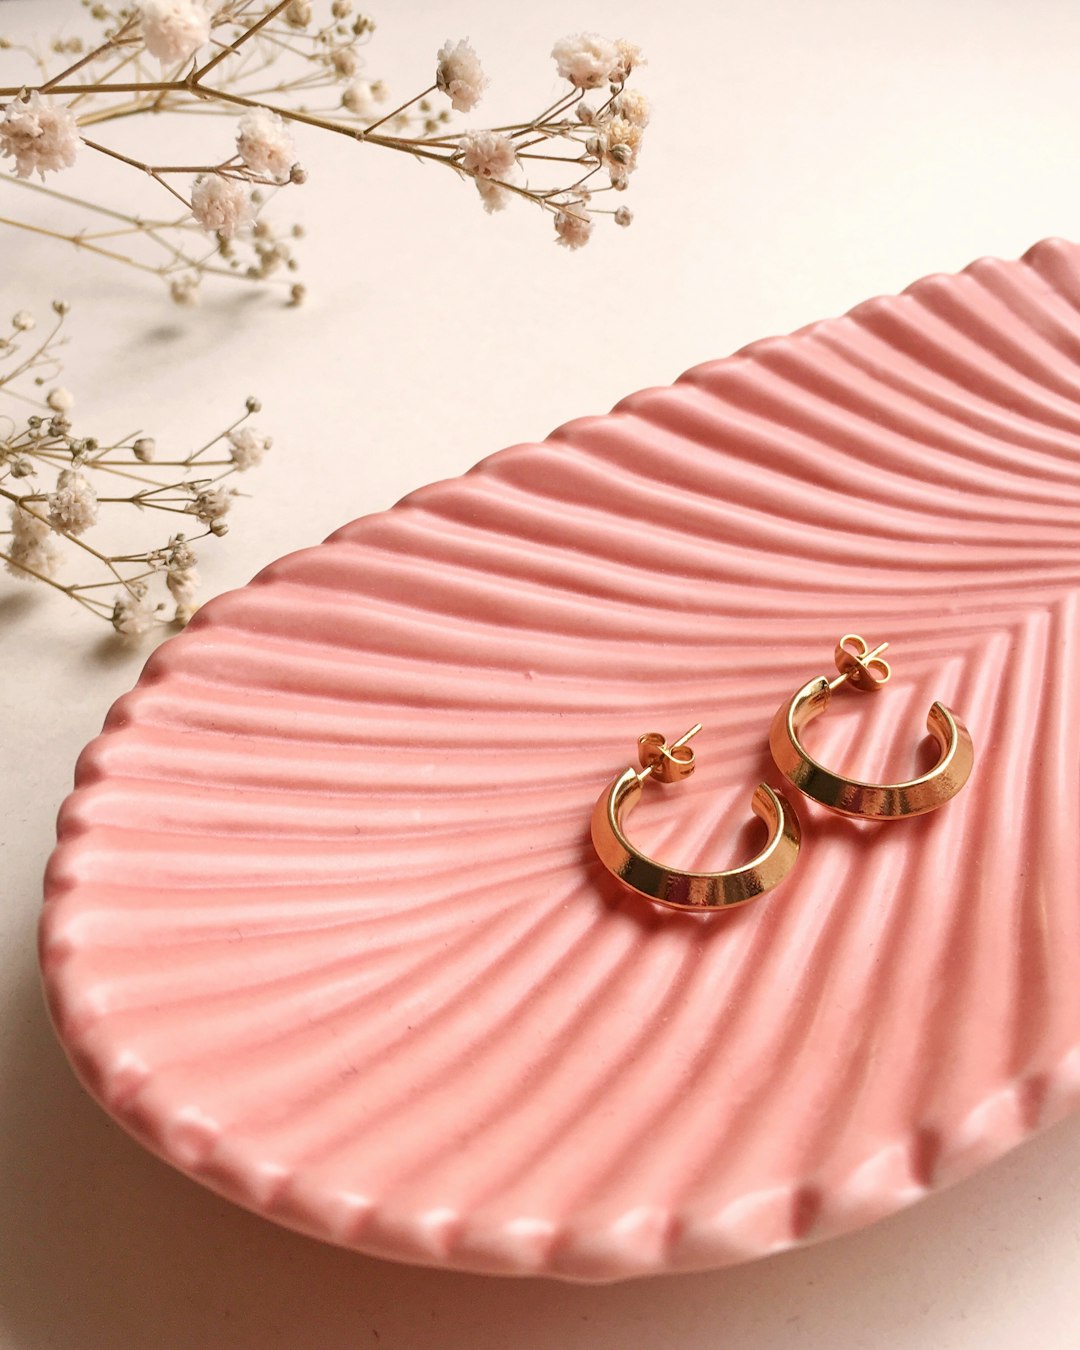 Make a Statement with Statement Earrings